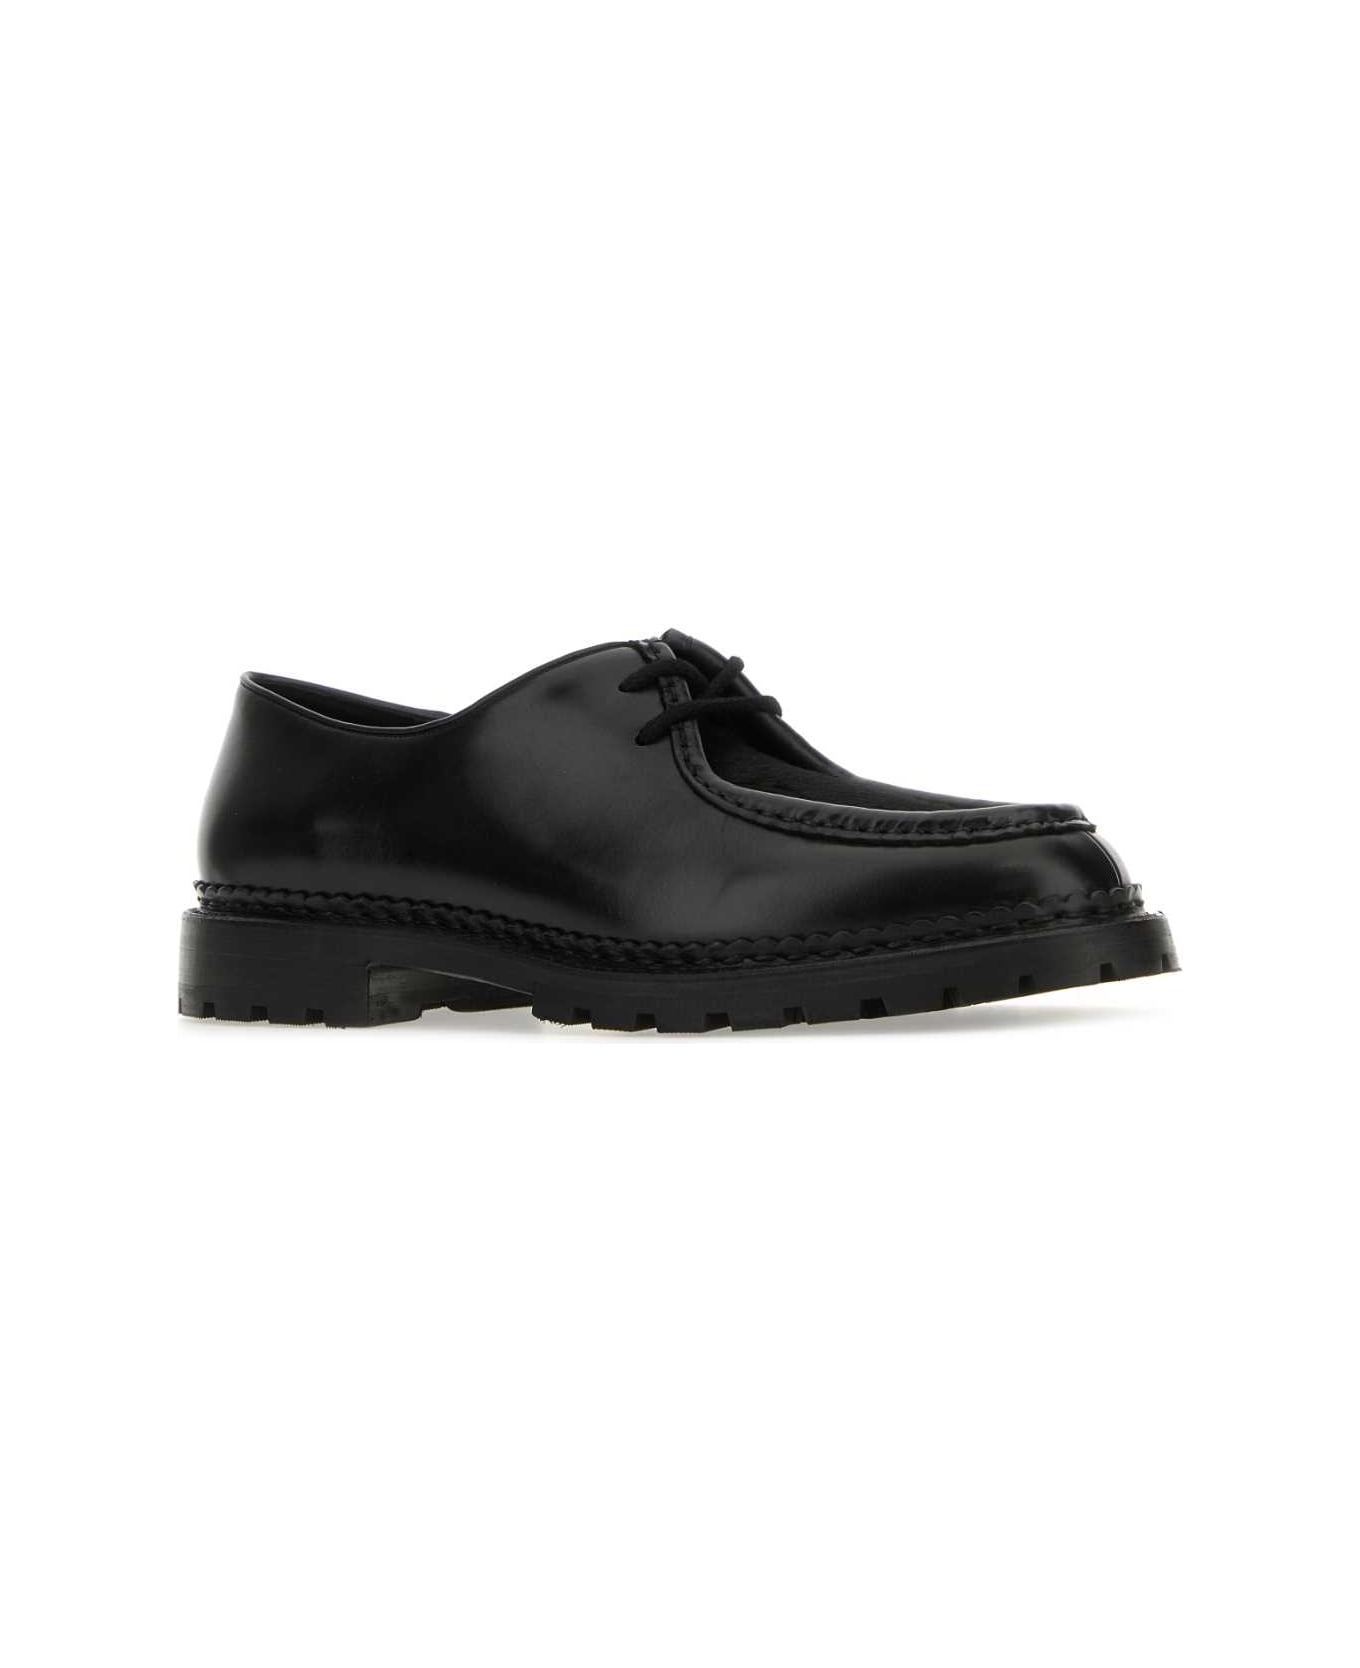 Saint Laurent Black Leather And Calf Hair Lace-up Shoes - NERONERONERO